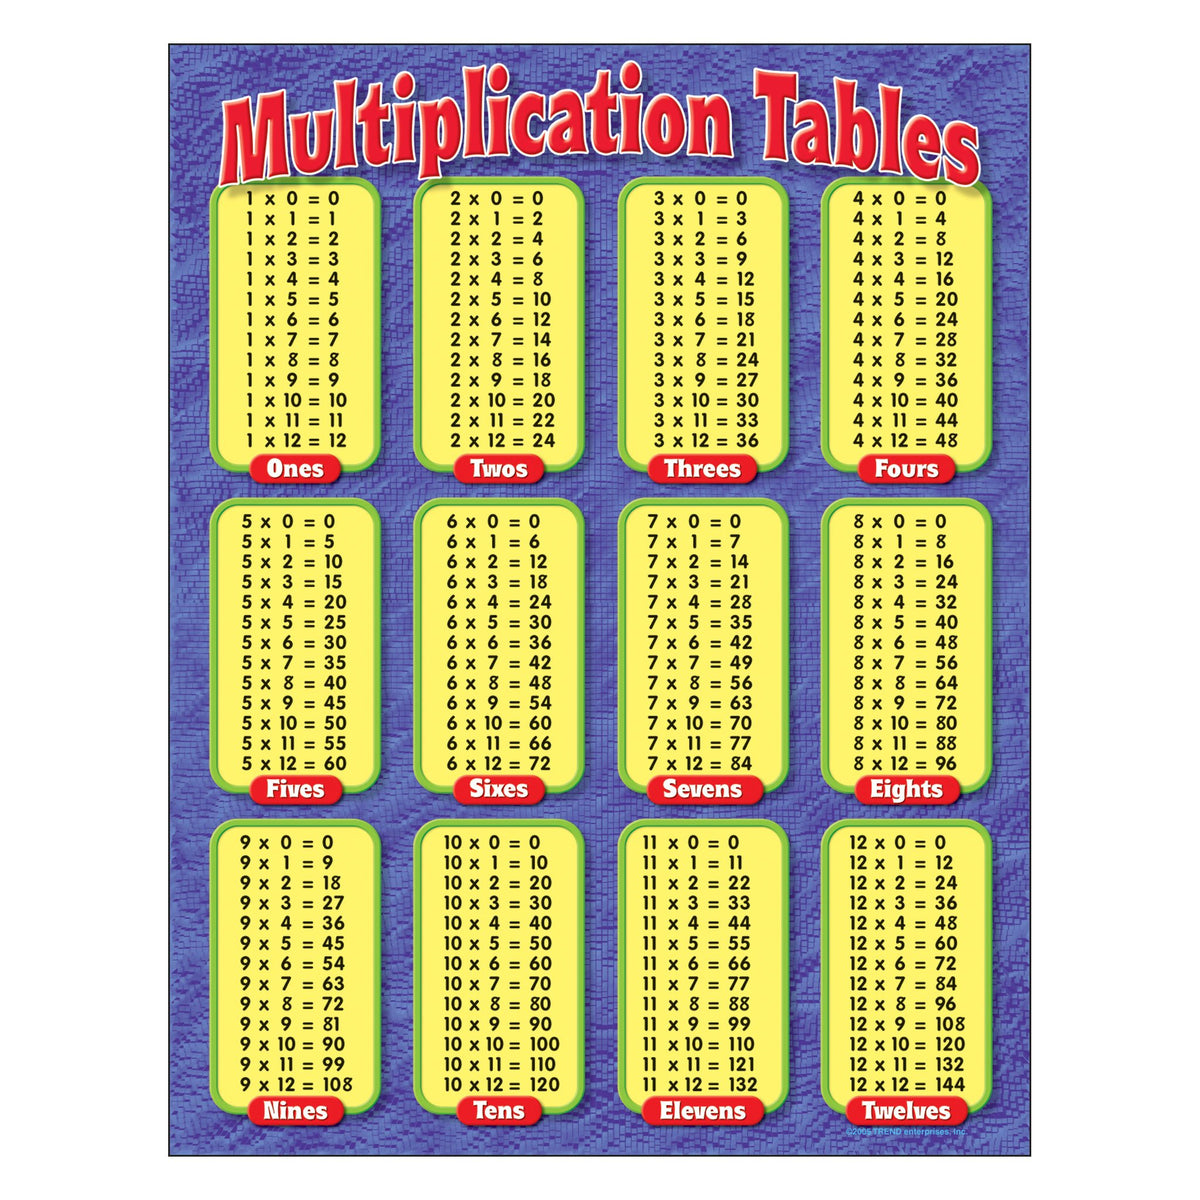 17 Times Table Chart